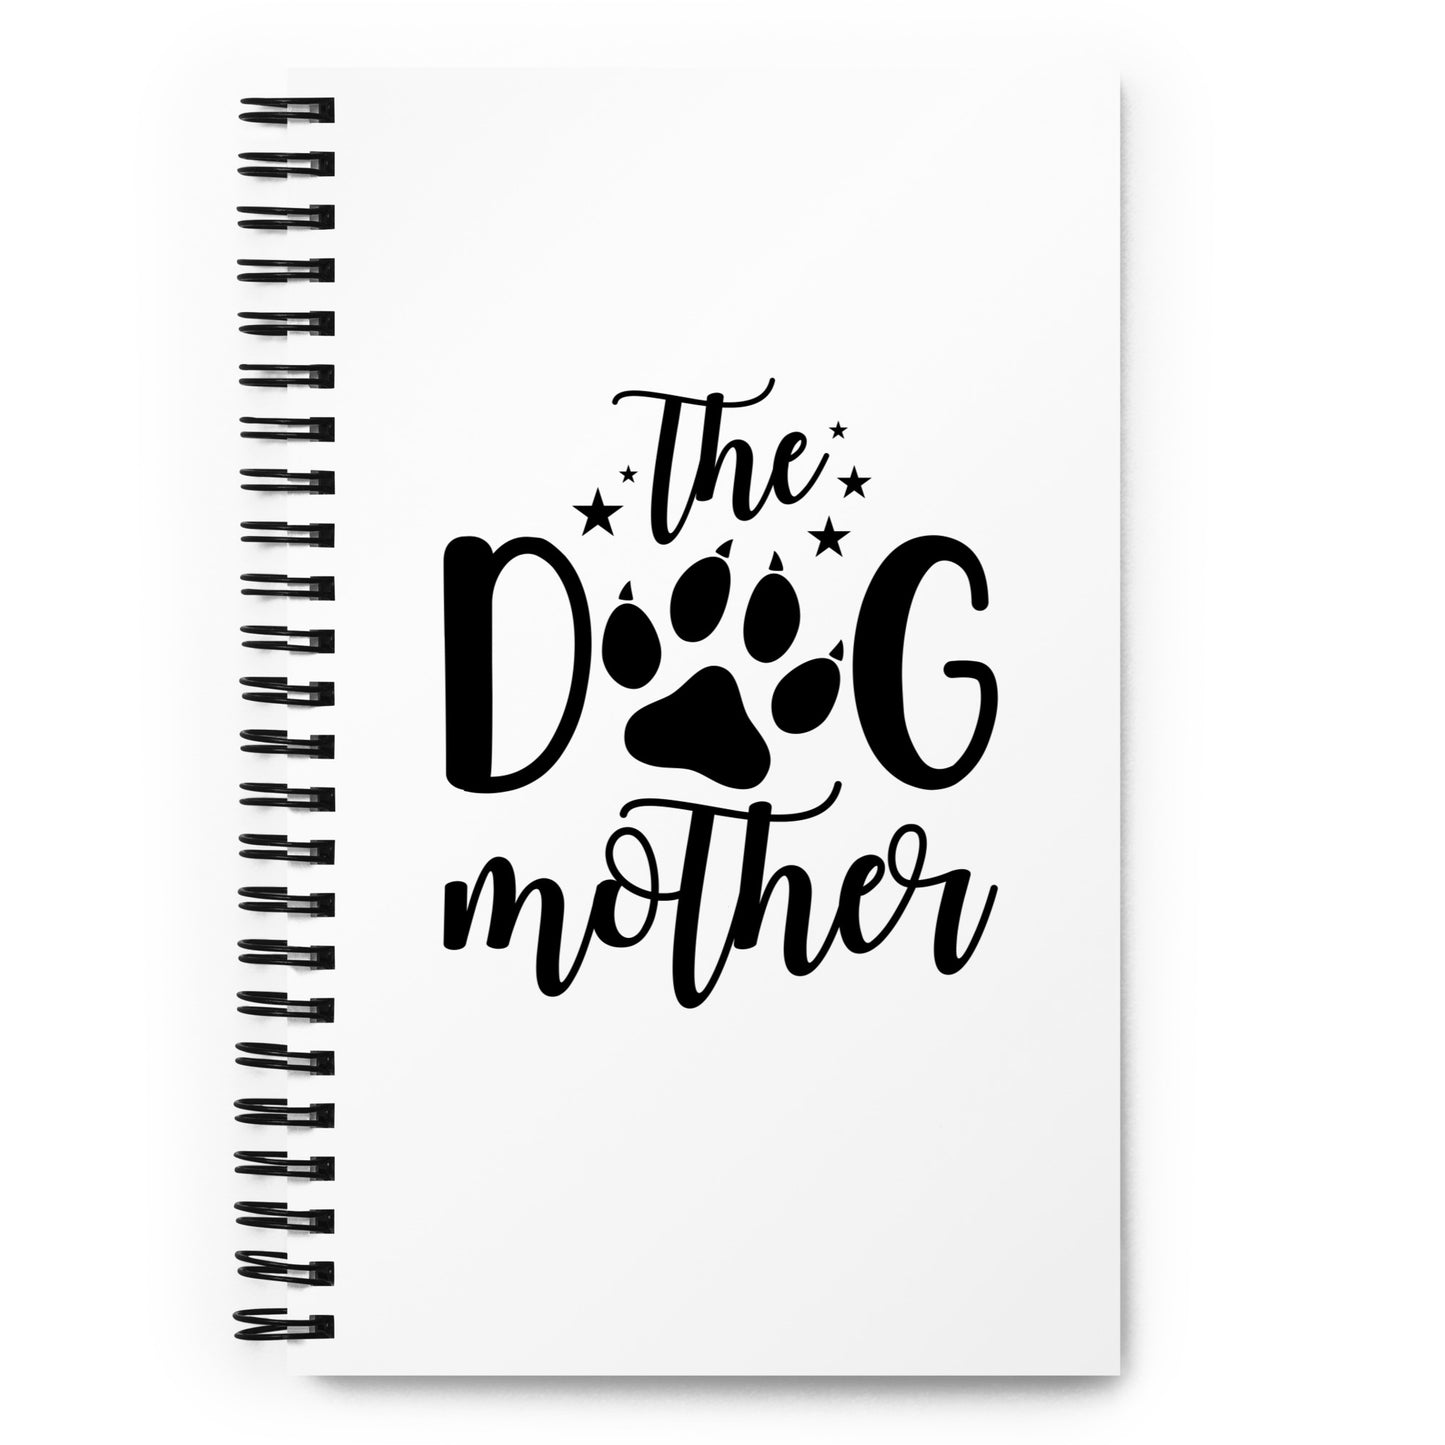 The Dog Mother Spiral notebook